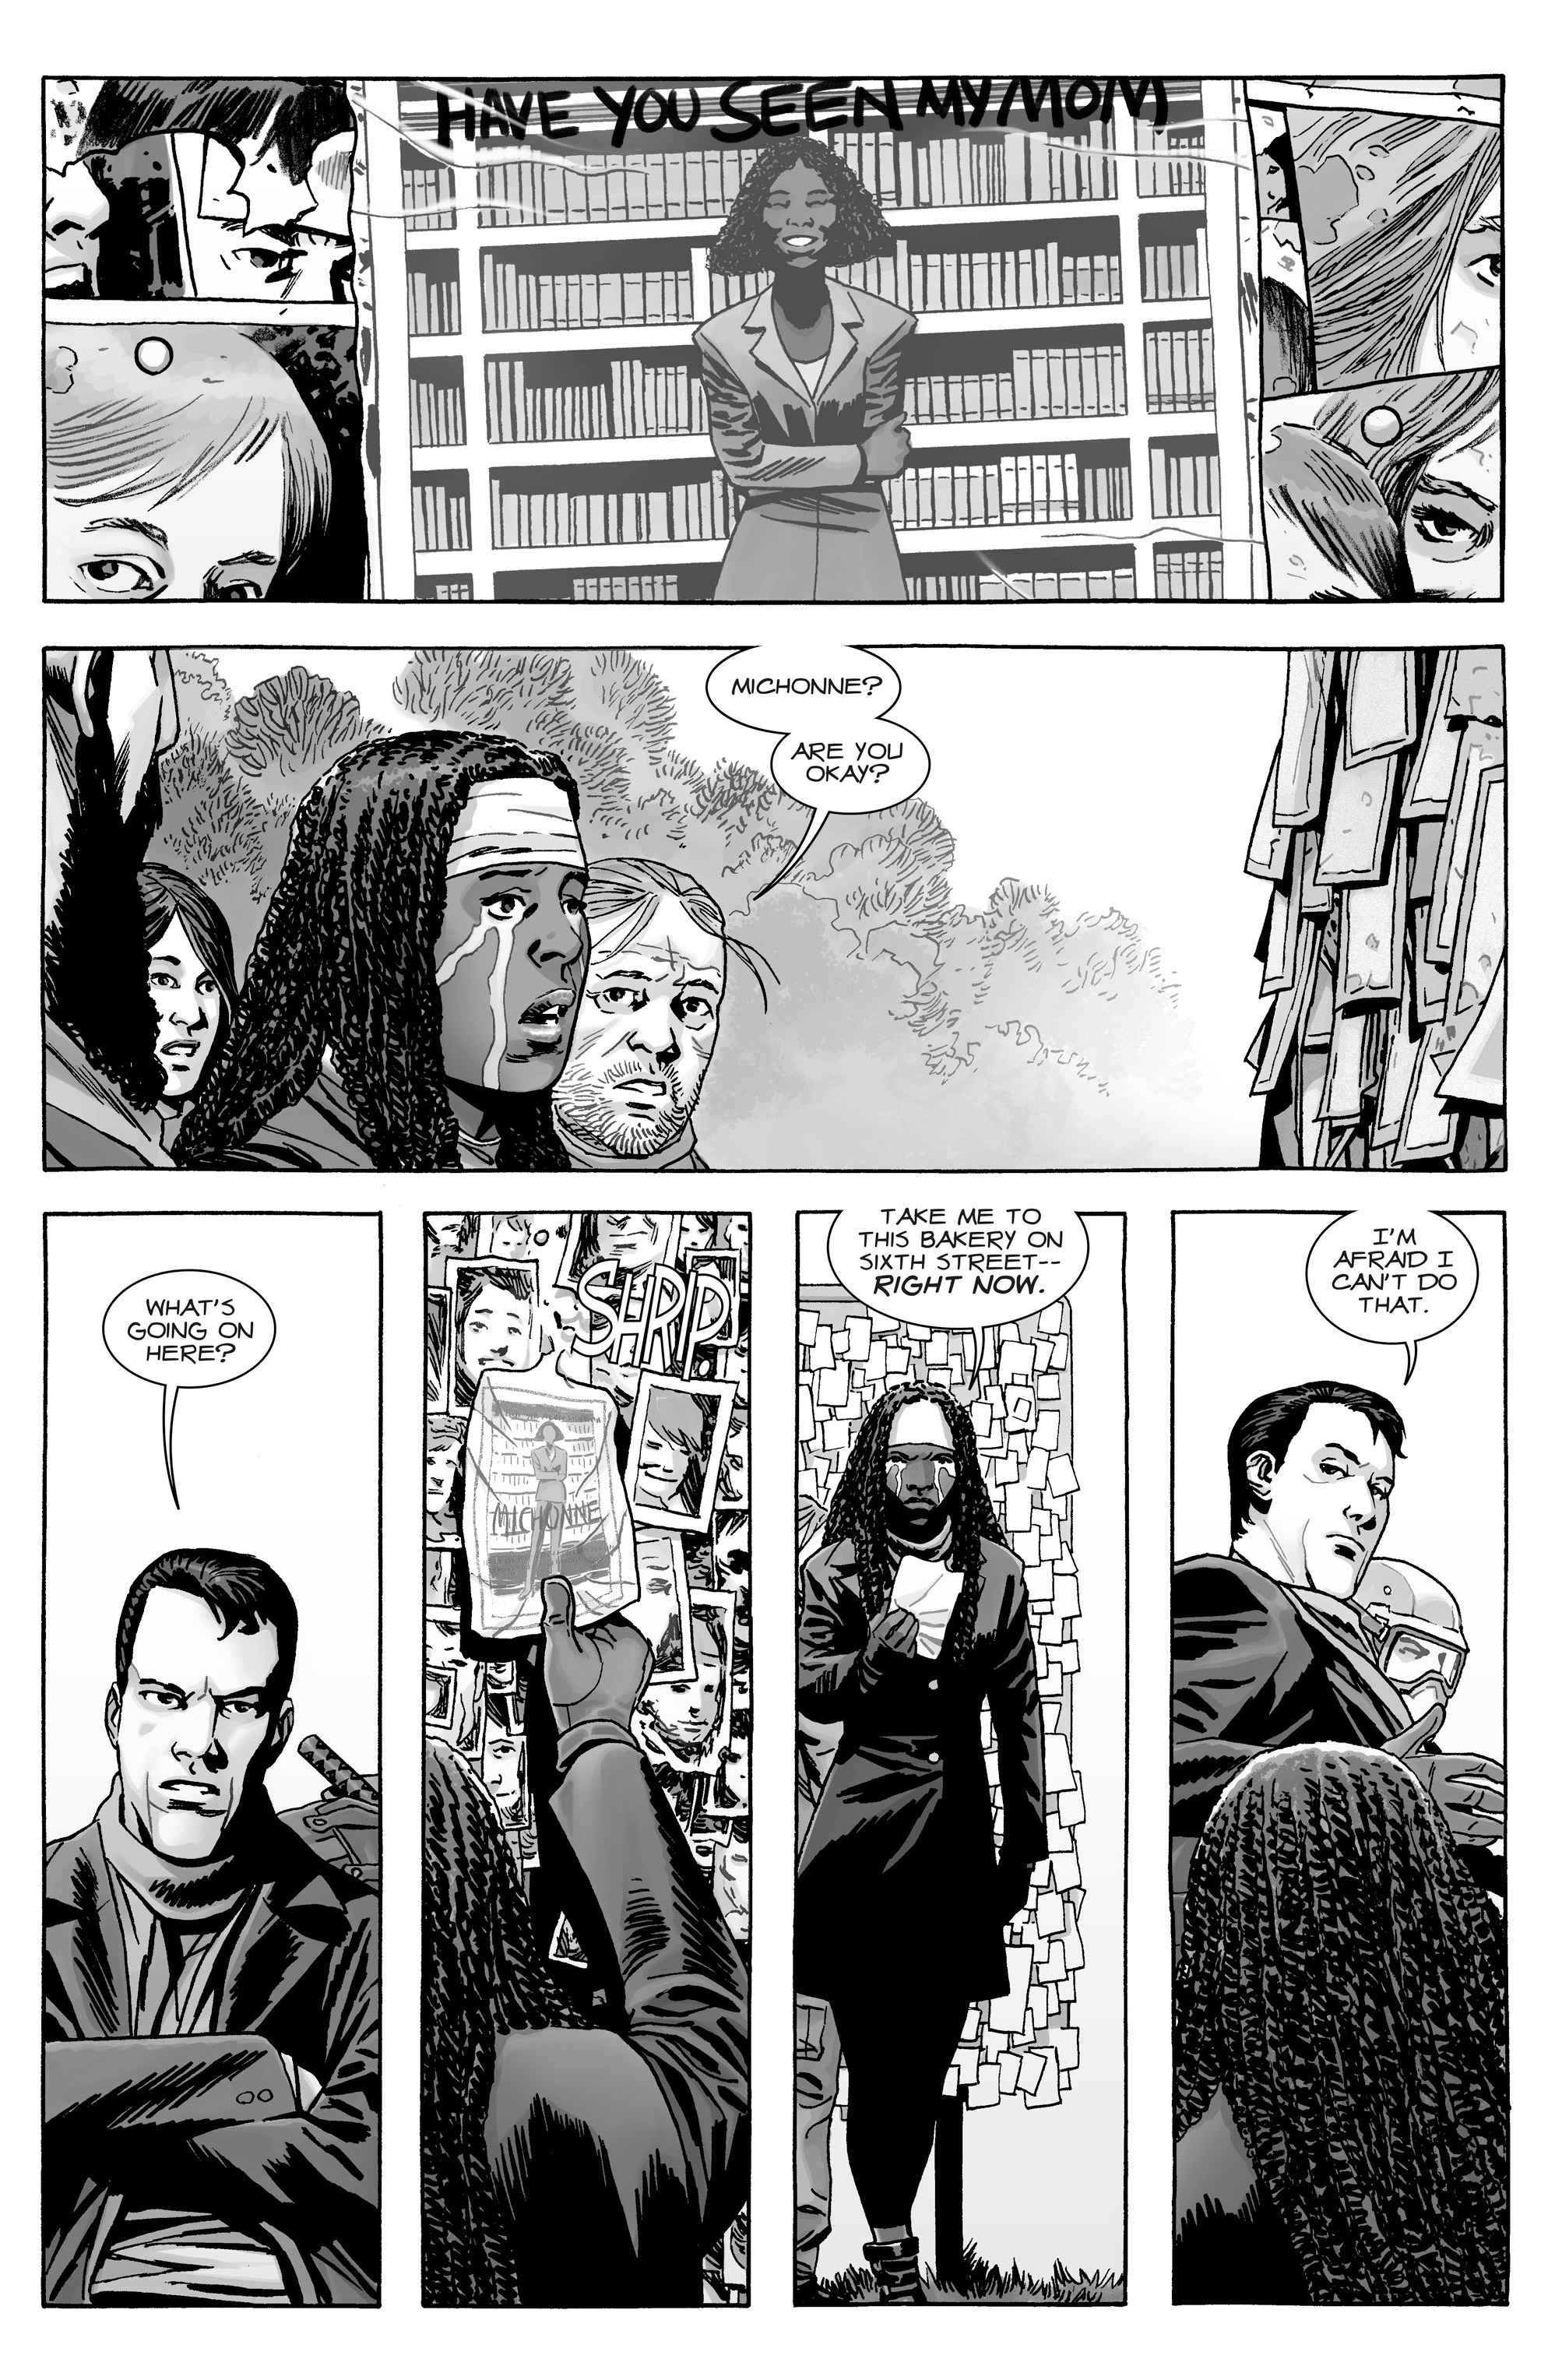 The Walking Dead (2003-): Chapter 176 - Page 3